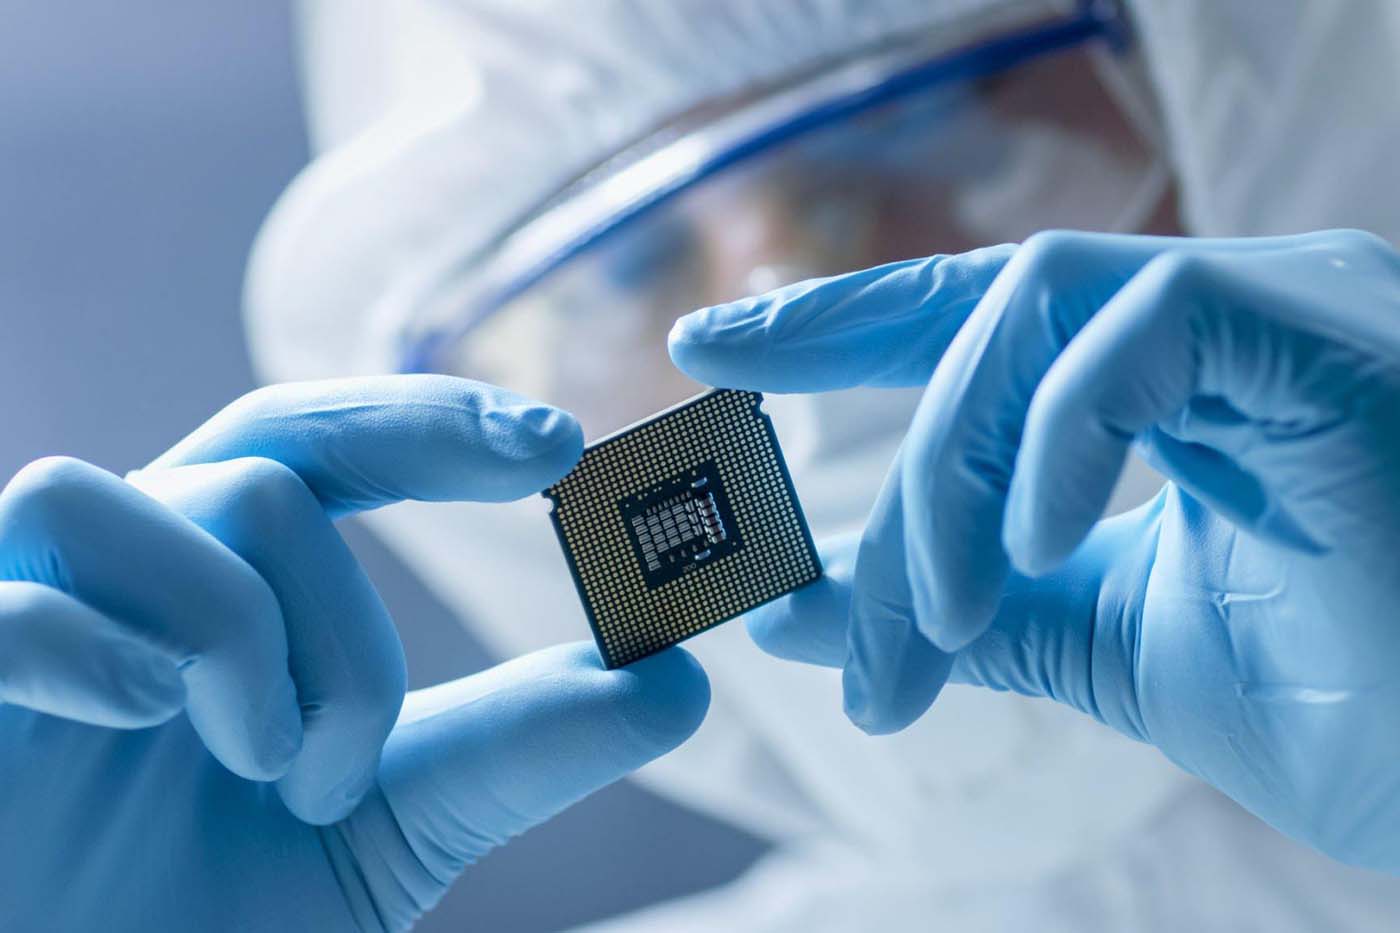 The Wonders and Future of Semiconductor Chips